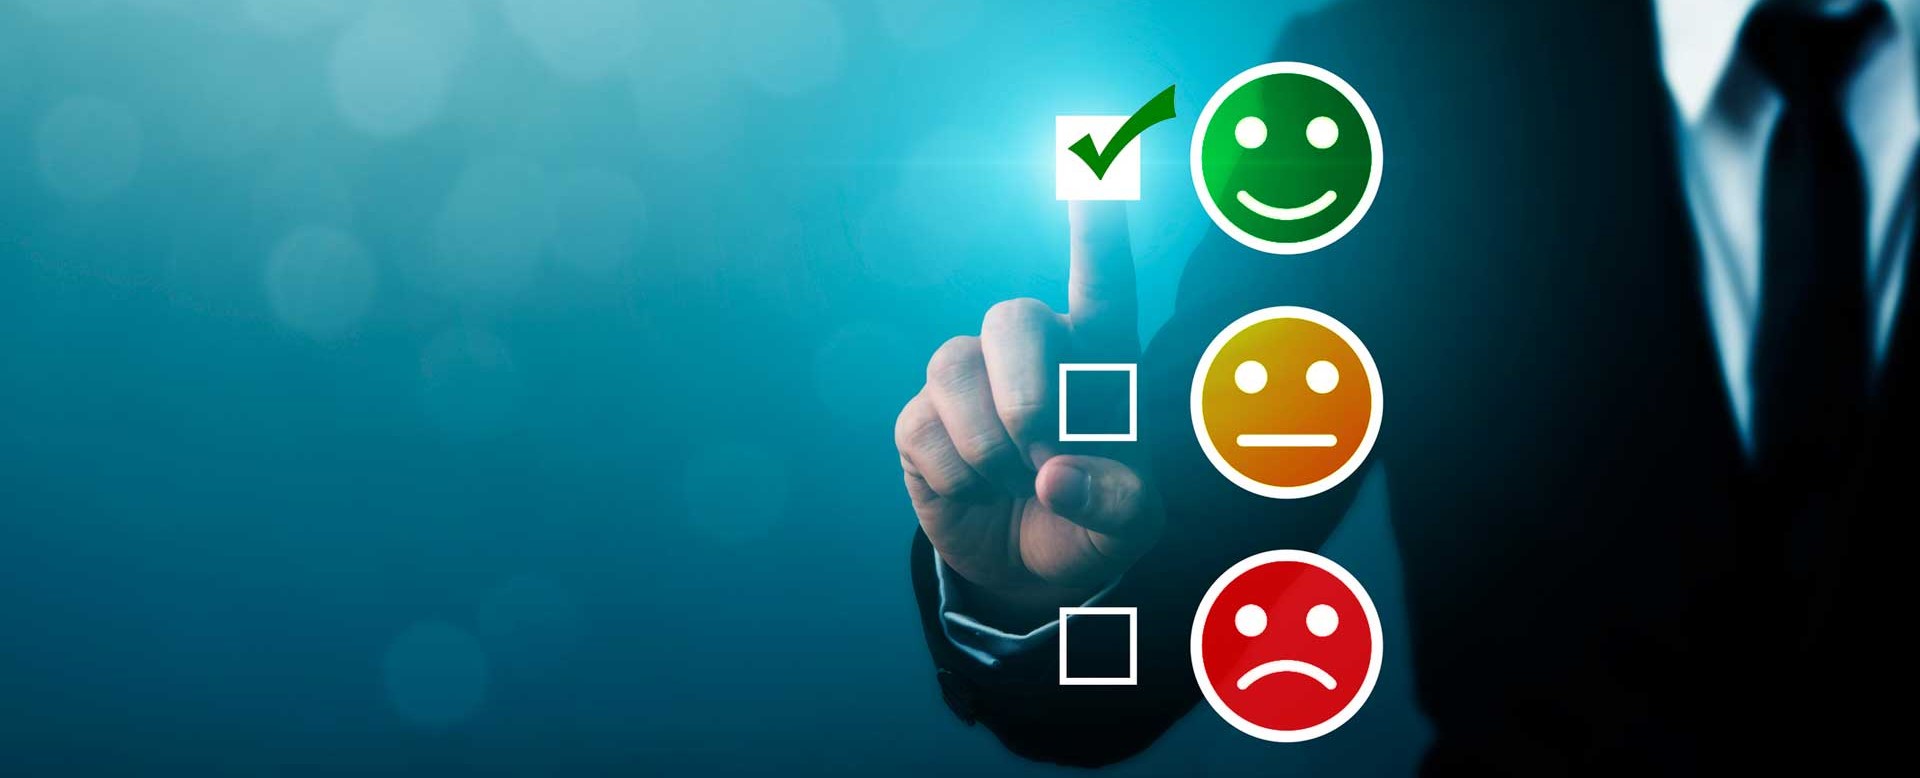 How do IT solutions impact customer satisfaction?